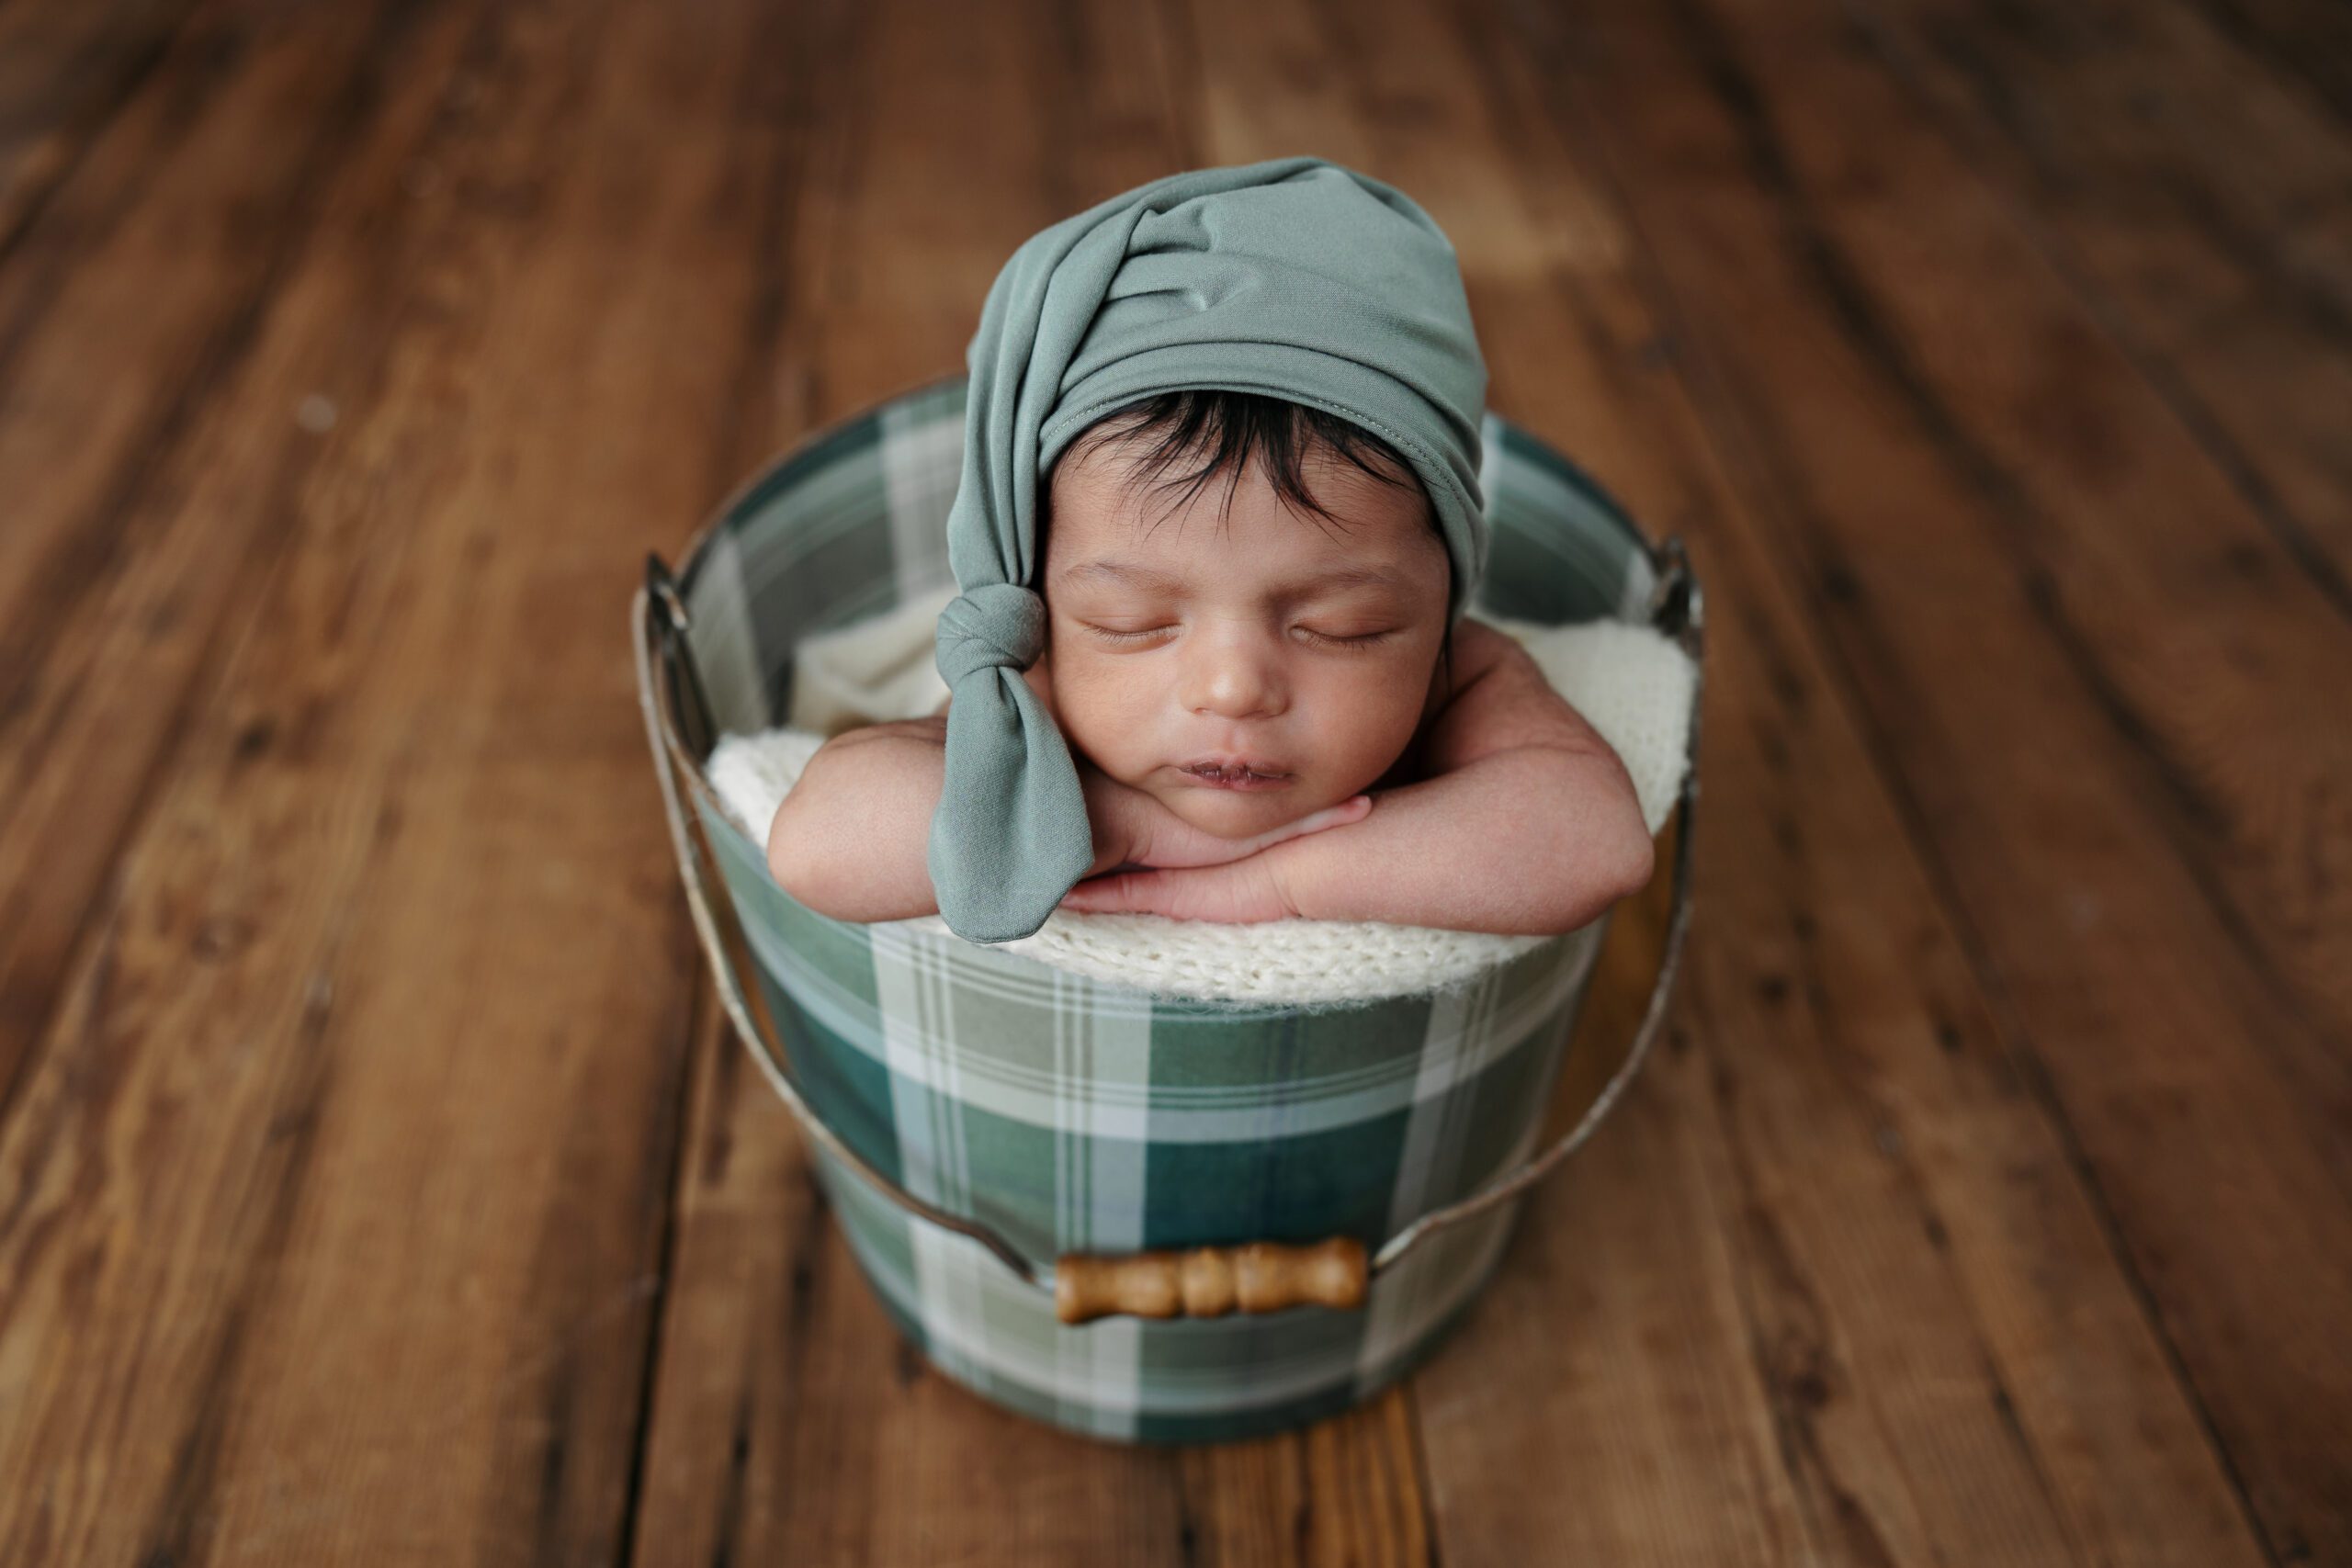 Newborn baby asleep in a cozy bucket, adorned with a cute bow hat, against a rustic wood backdrop.